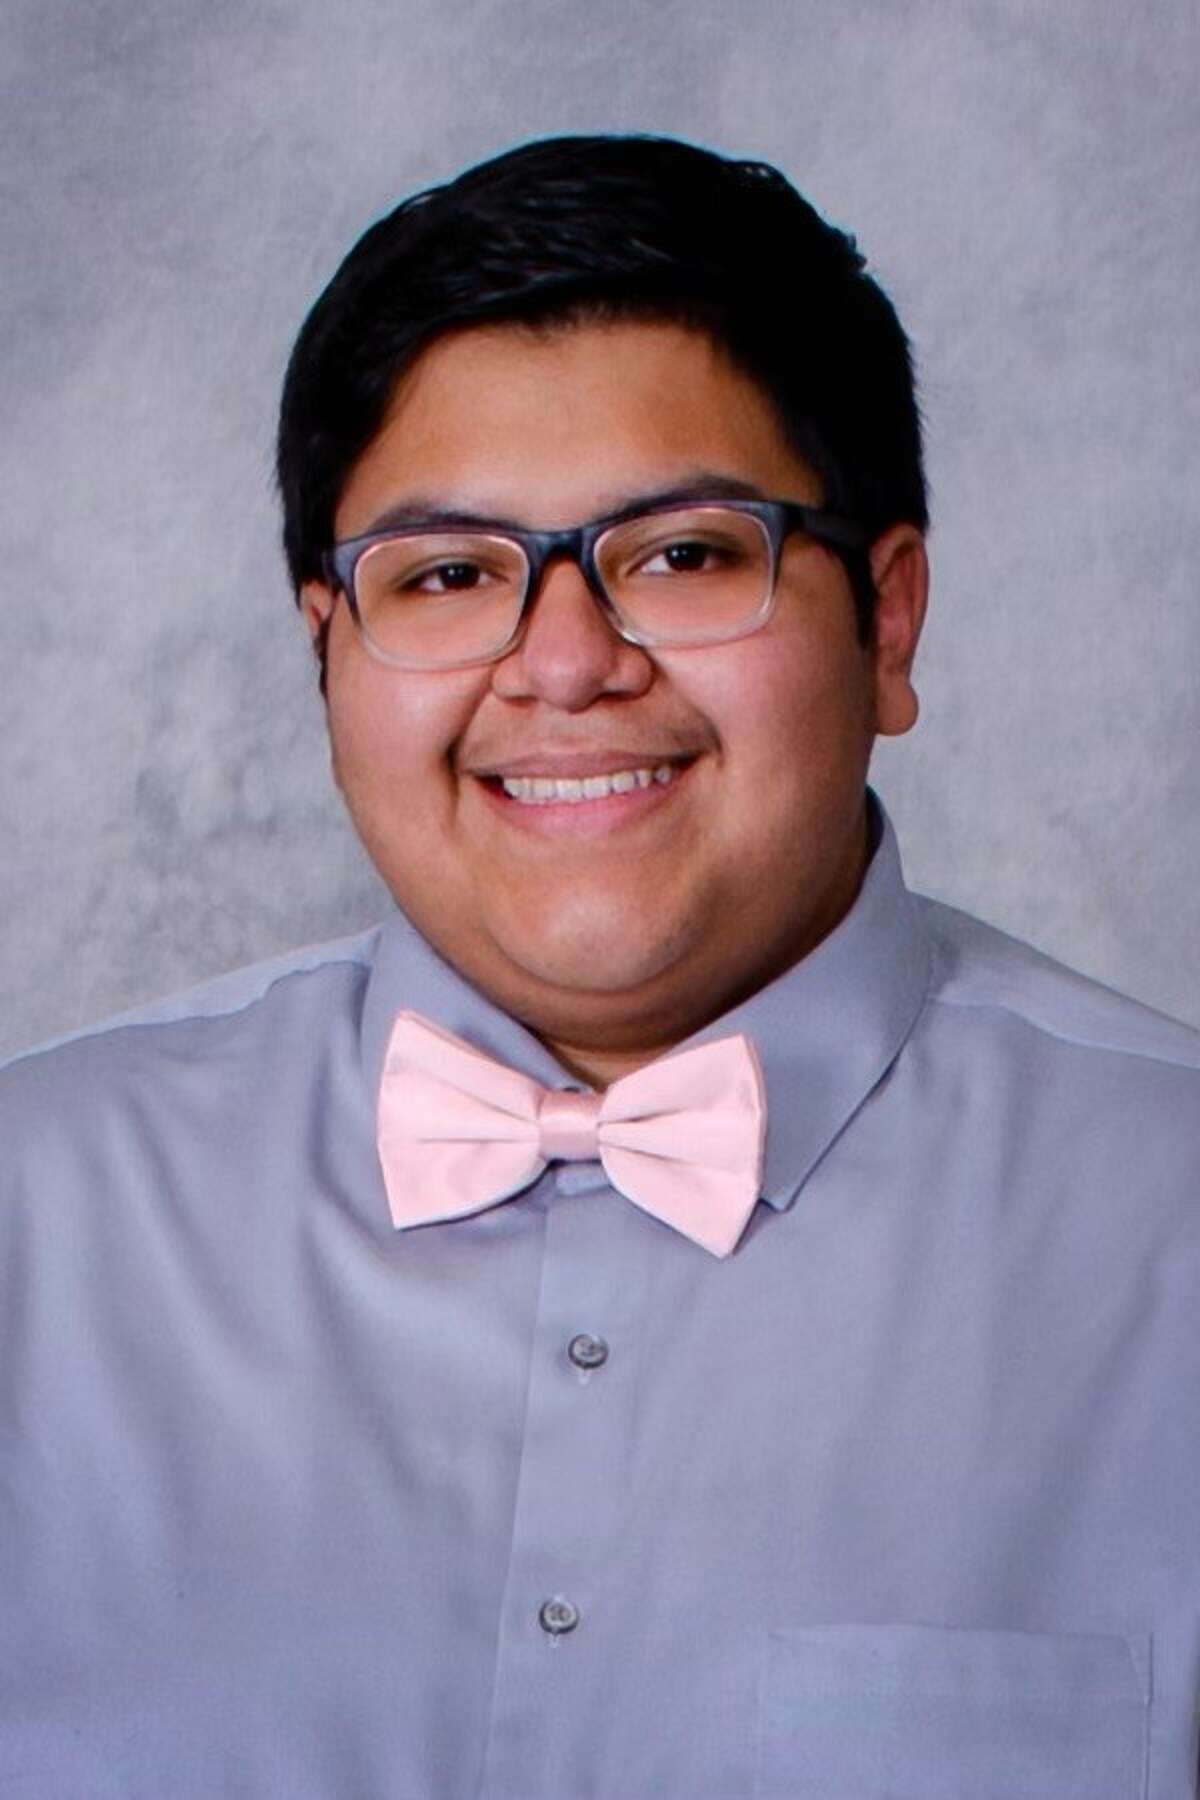 Caleb Aguirre, Plainview High School senior, has qualified to be a part of the Texas All-State Ensemble concerts for the third year in a row.